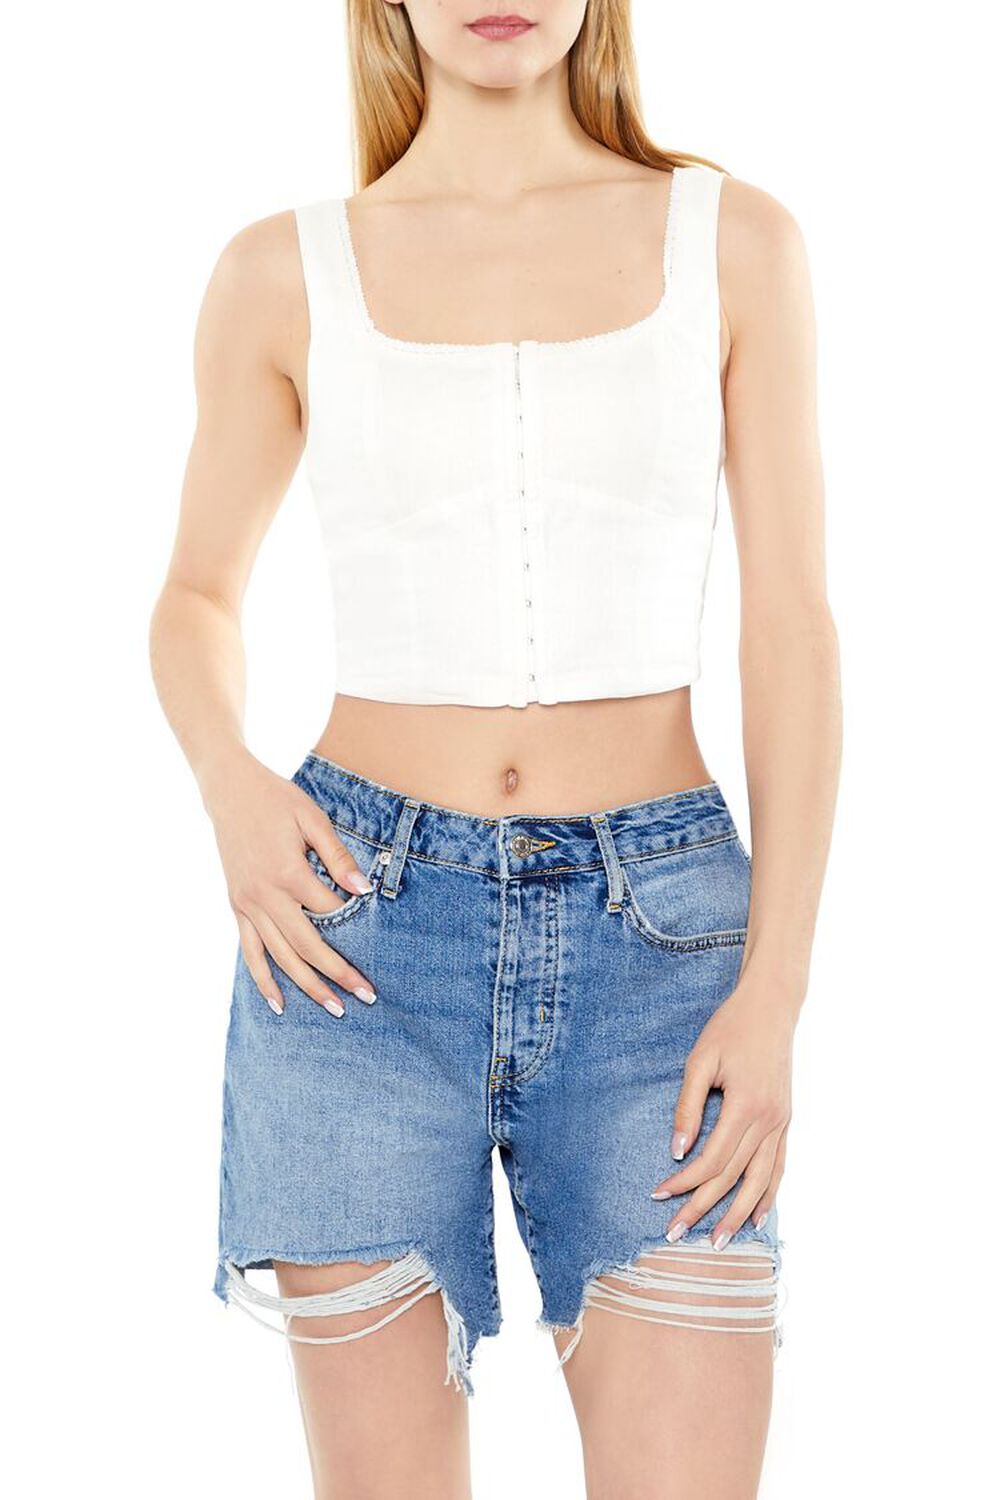 Forever 21 Women's Lace-Trim Hook-and-Eye Crop Top in White, XS | Textured | 57% Linen, 43% Rayon | F21